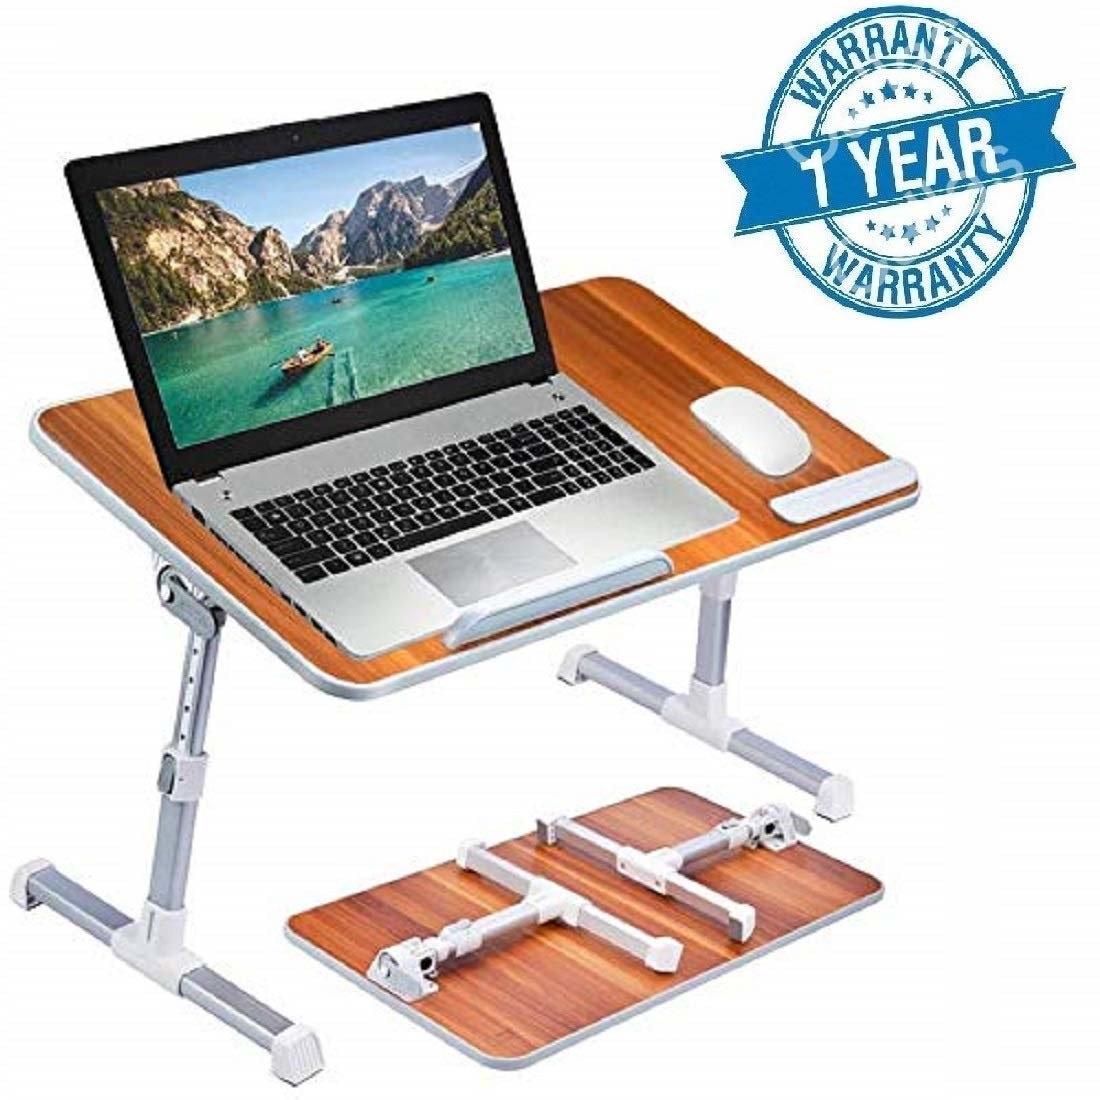 A brown laptop table with a laptop on it and text that says &quot;1-Year Warranty&quot;.